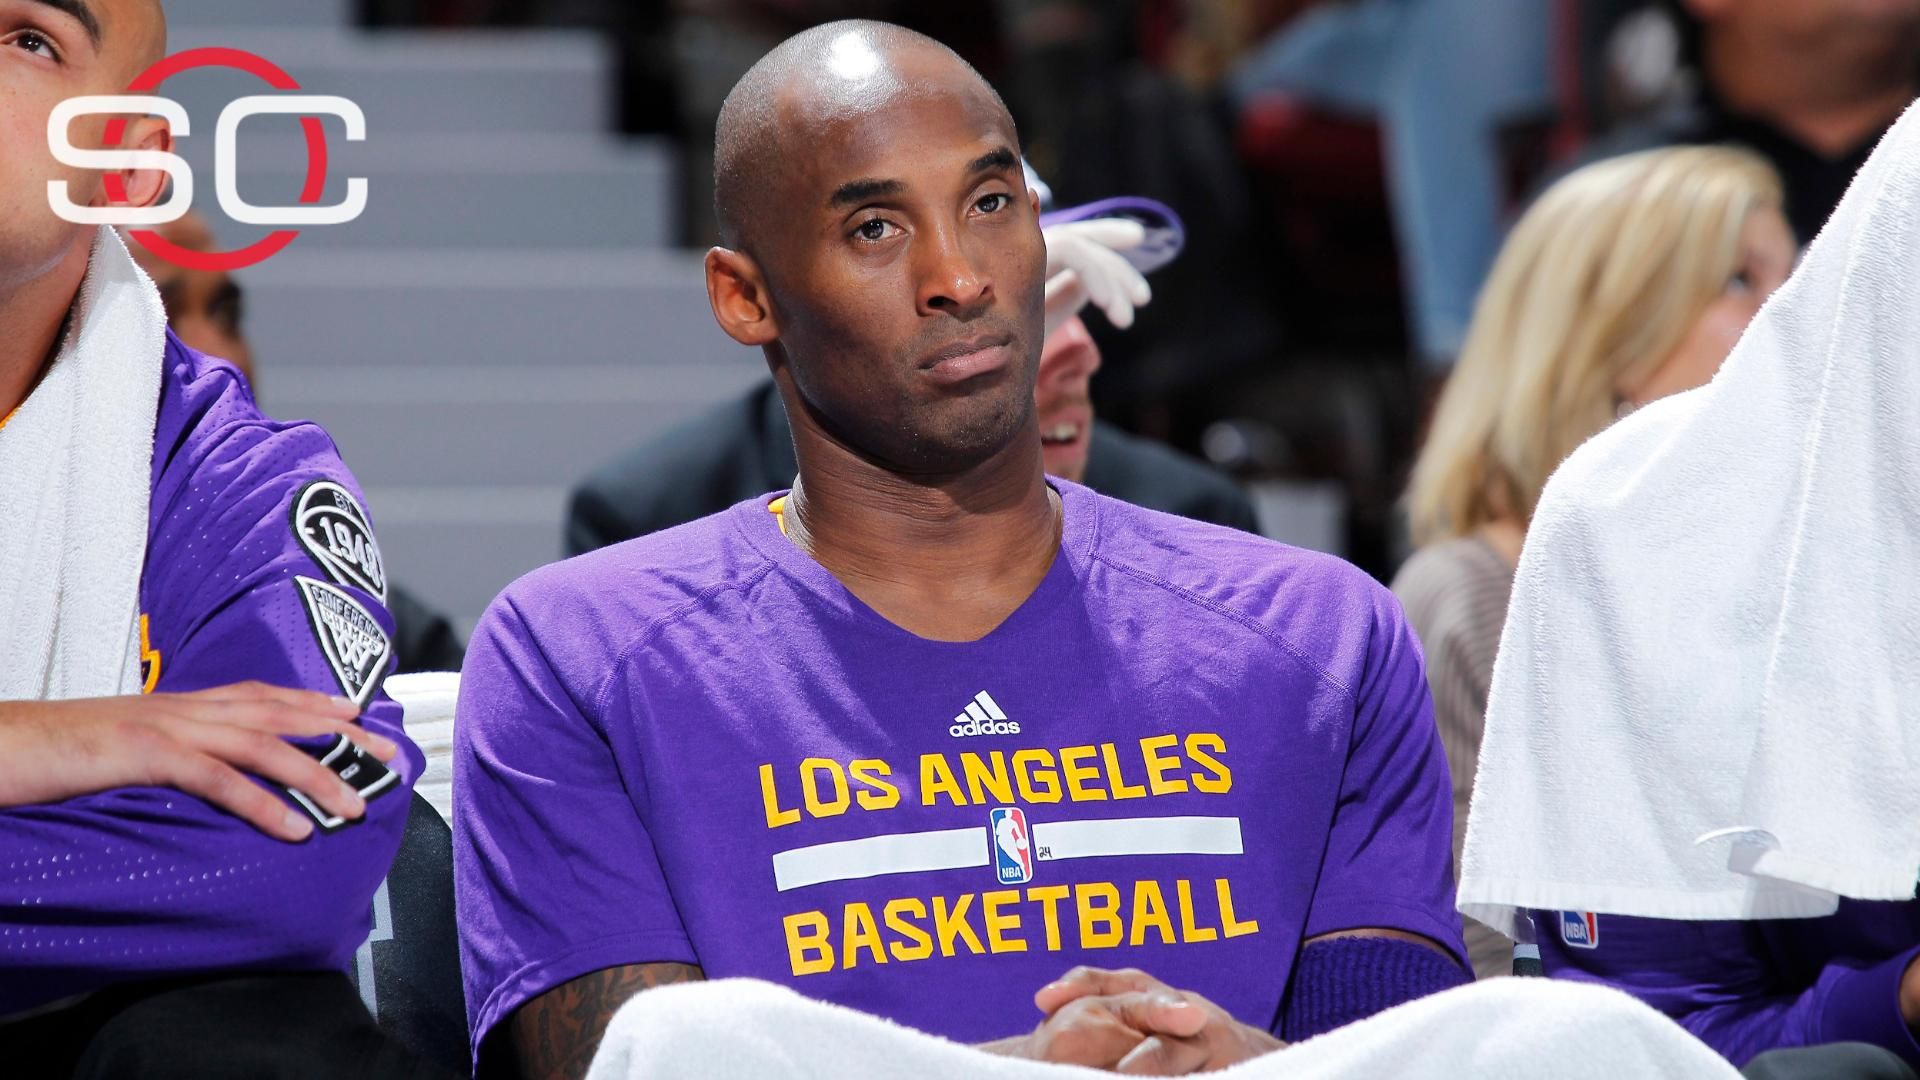 Angry Kobe Bryant takes day off